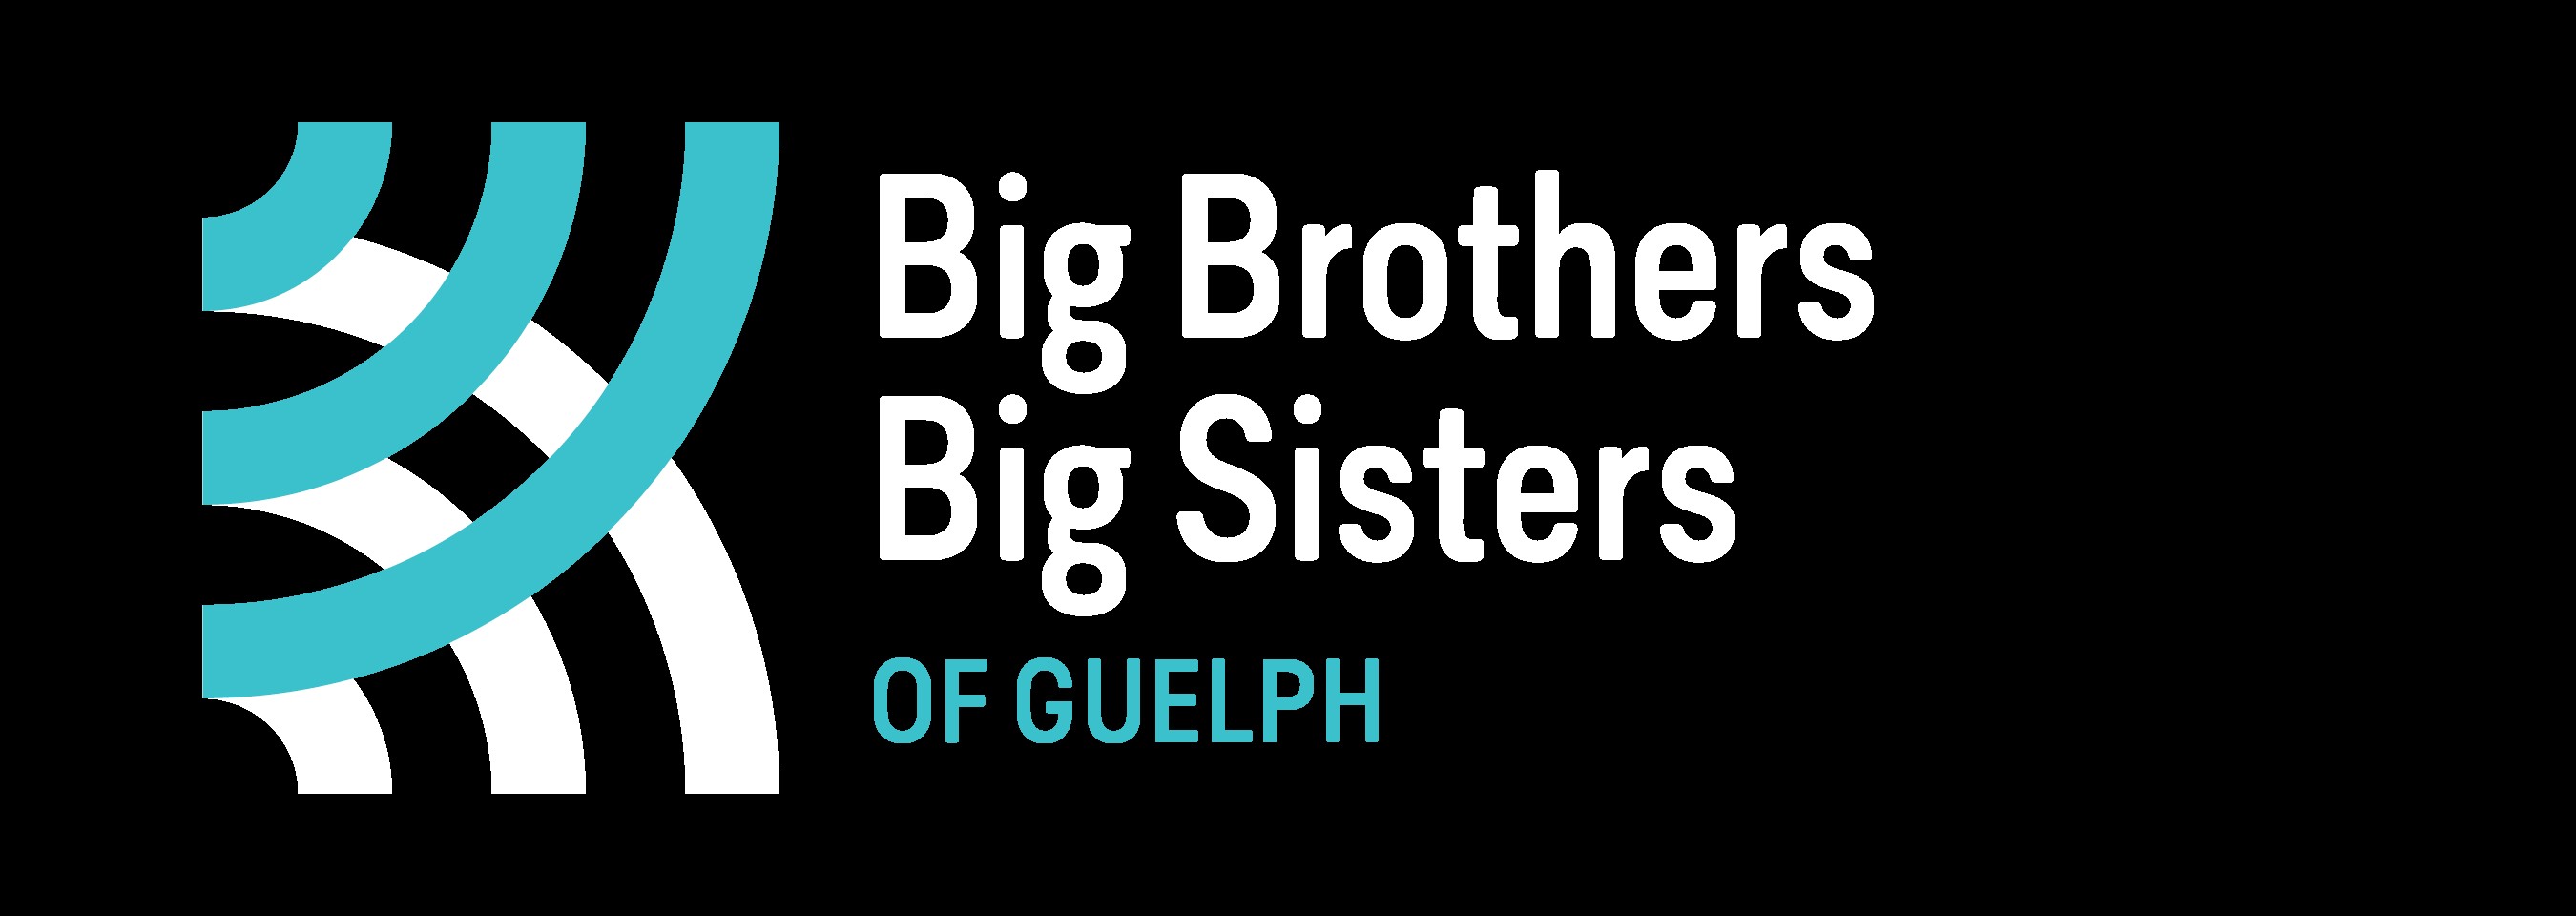 Big Brothers Big Sisters of Guelph campaign looks to add 50 new mentors